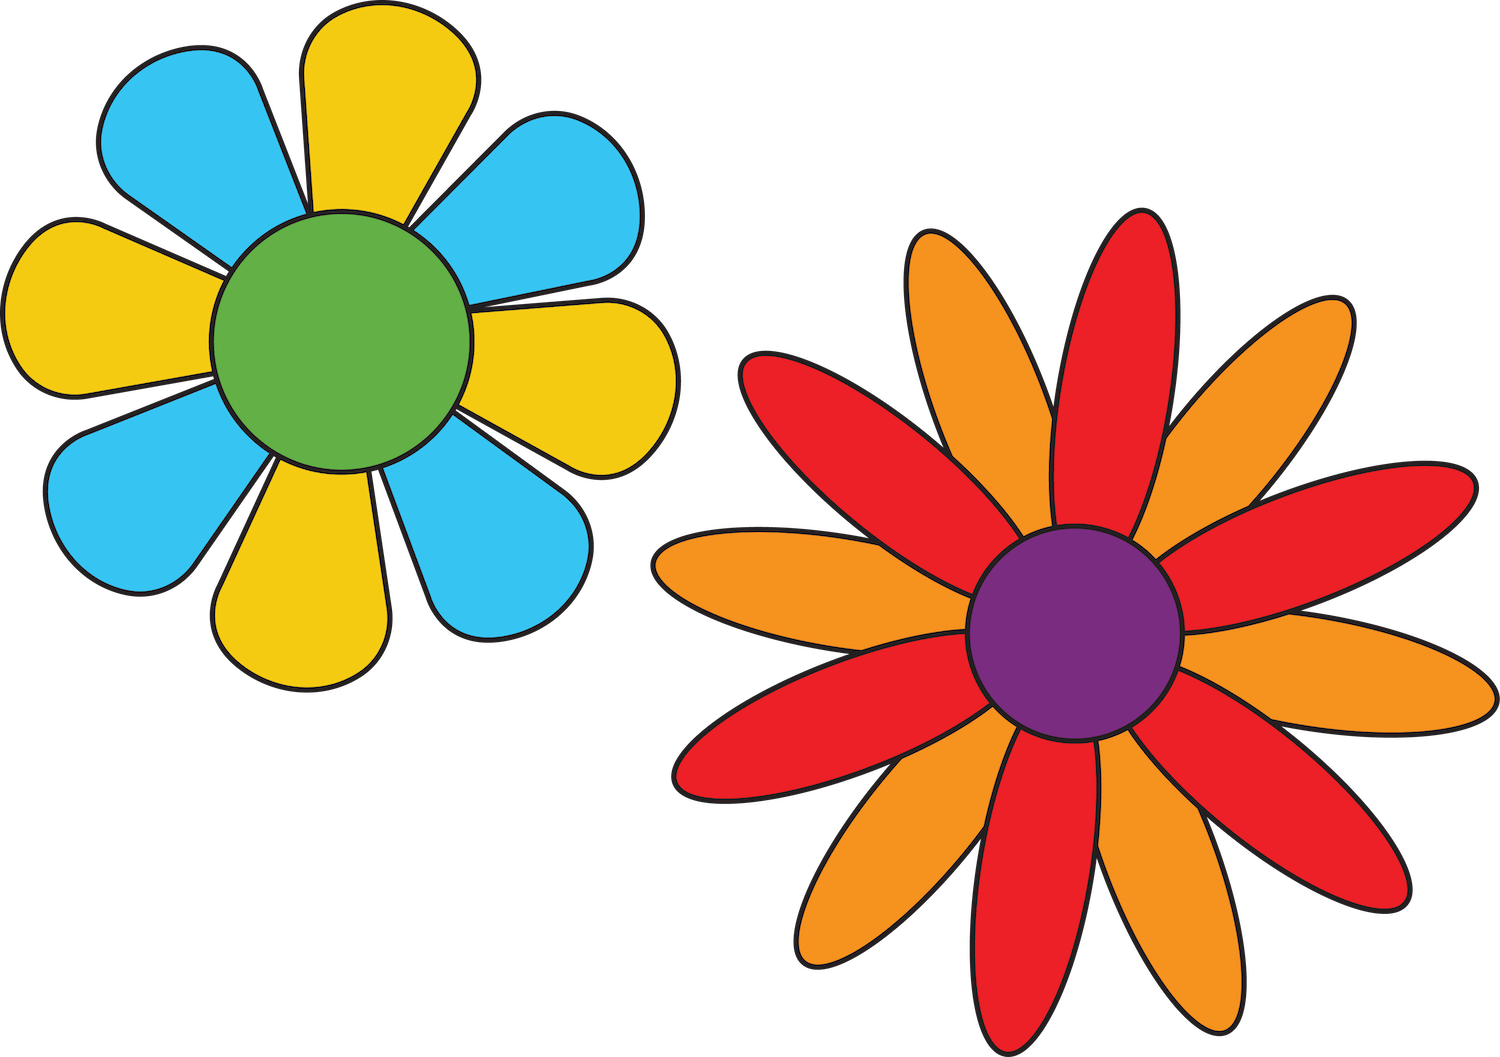 Two colorful flowers on a clear background.